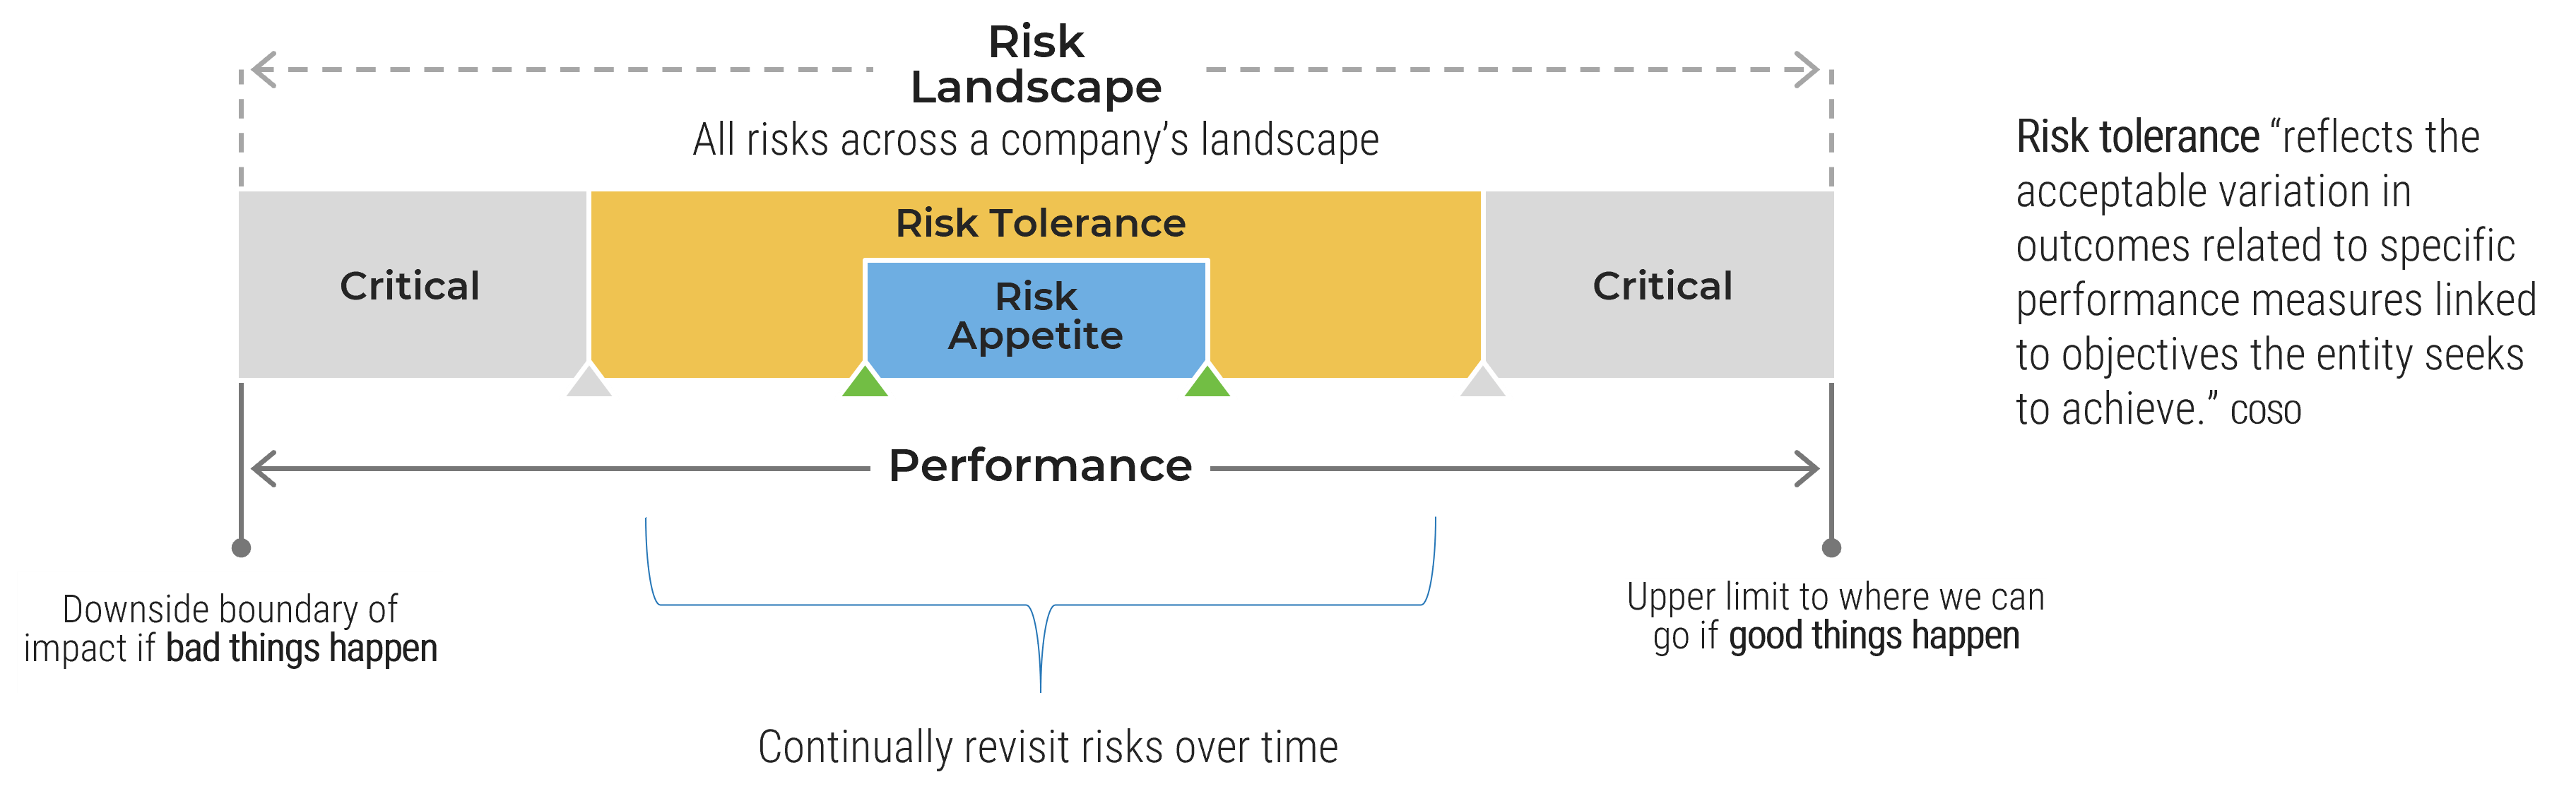 The image contains a screenshot of a diagram of the risk landscape.